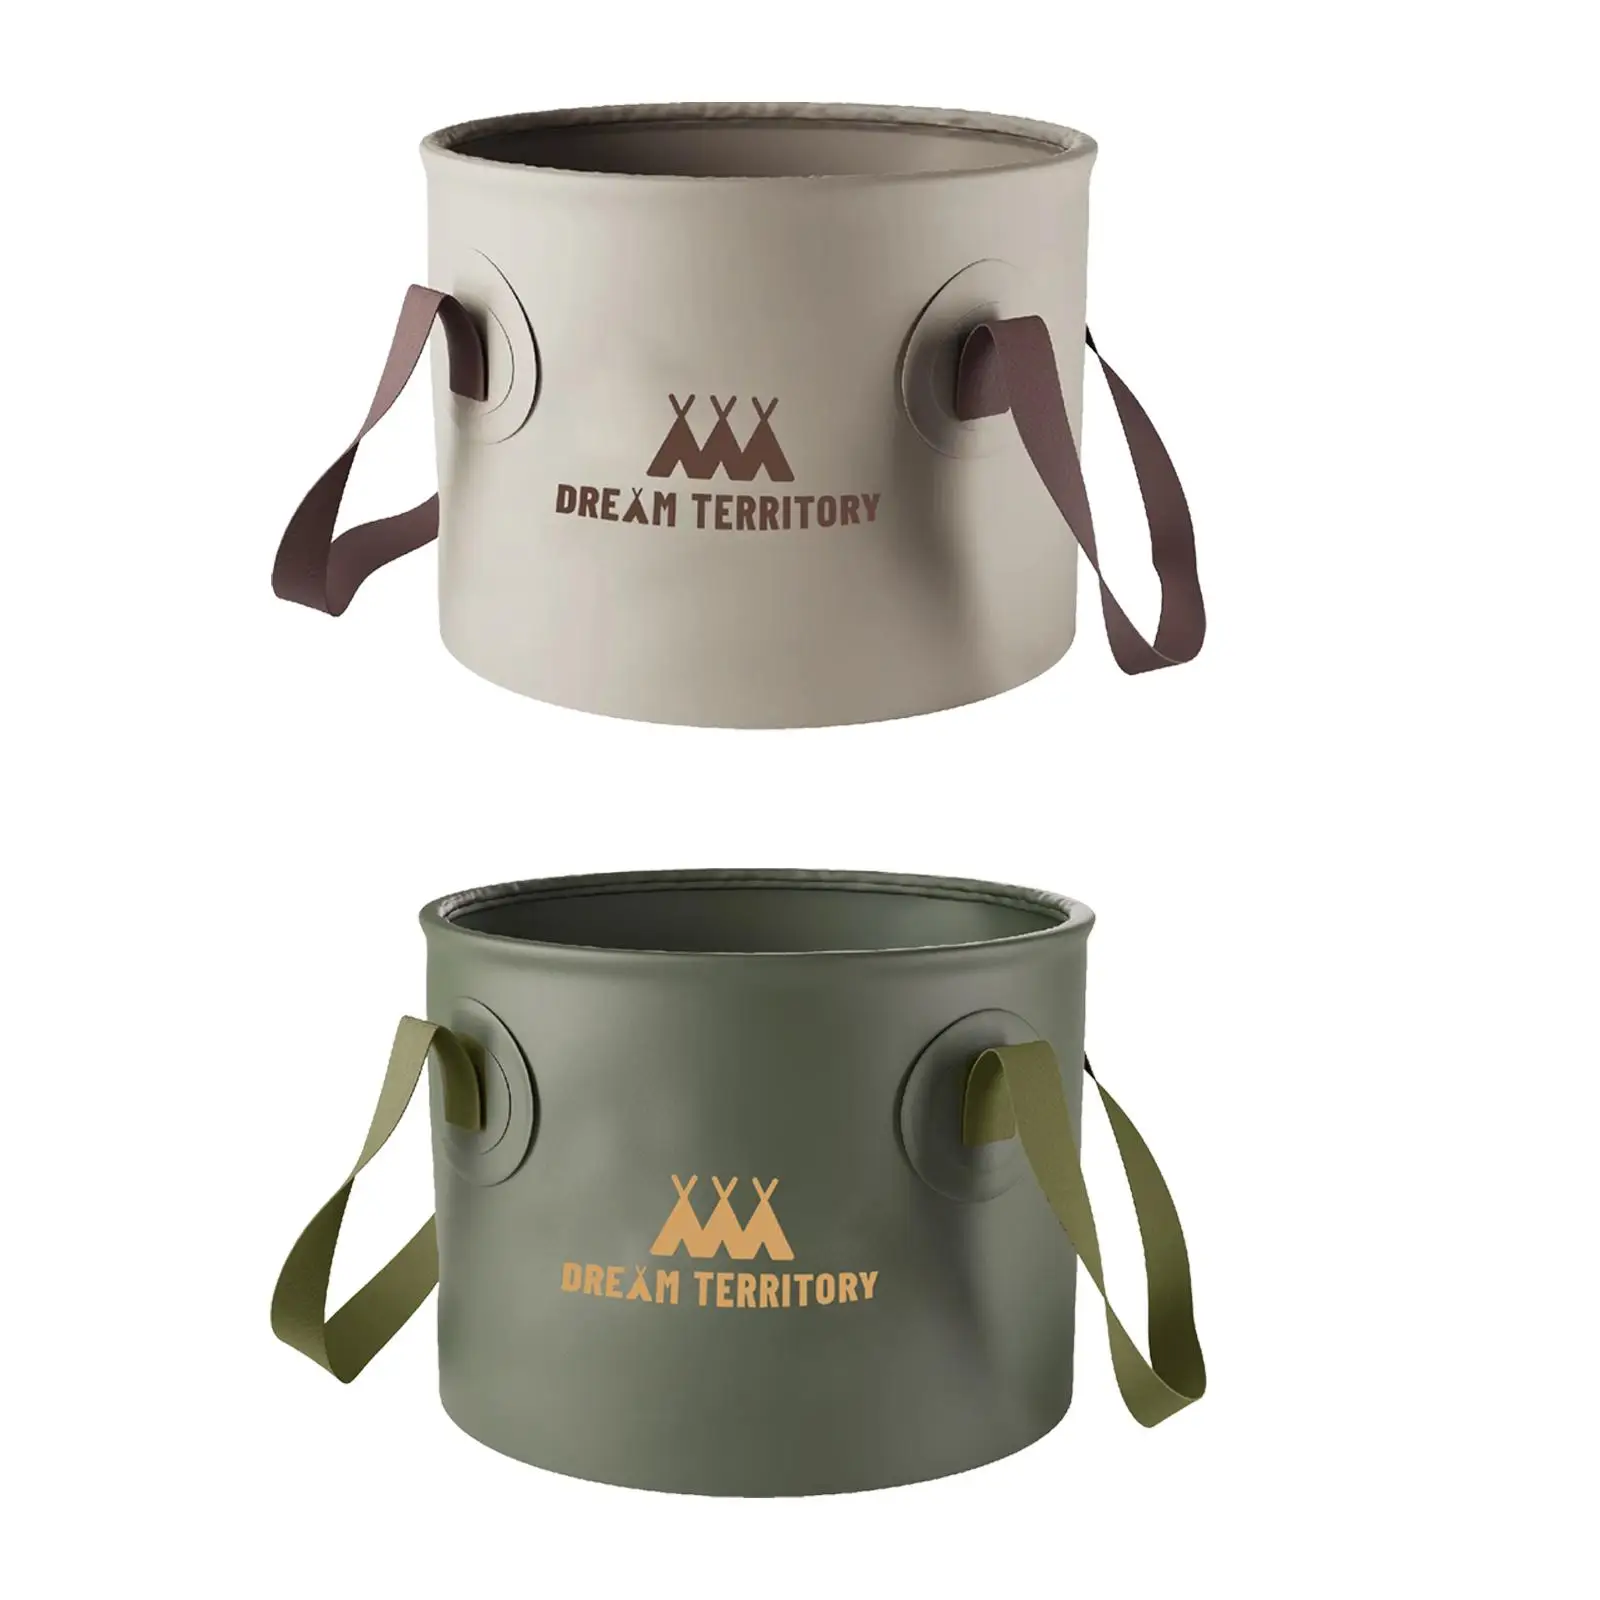 Collapsible Bucket Folding Water Bucket Camping Bucket with Handle Water Storage Container for Camping Travelling Hiking Fishing